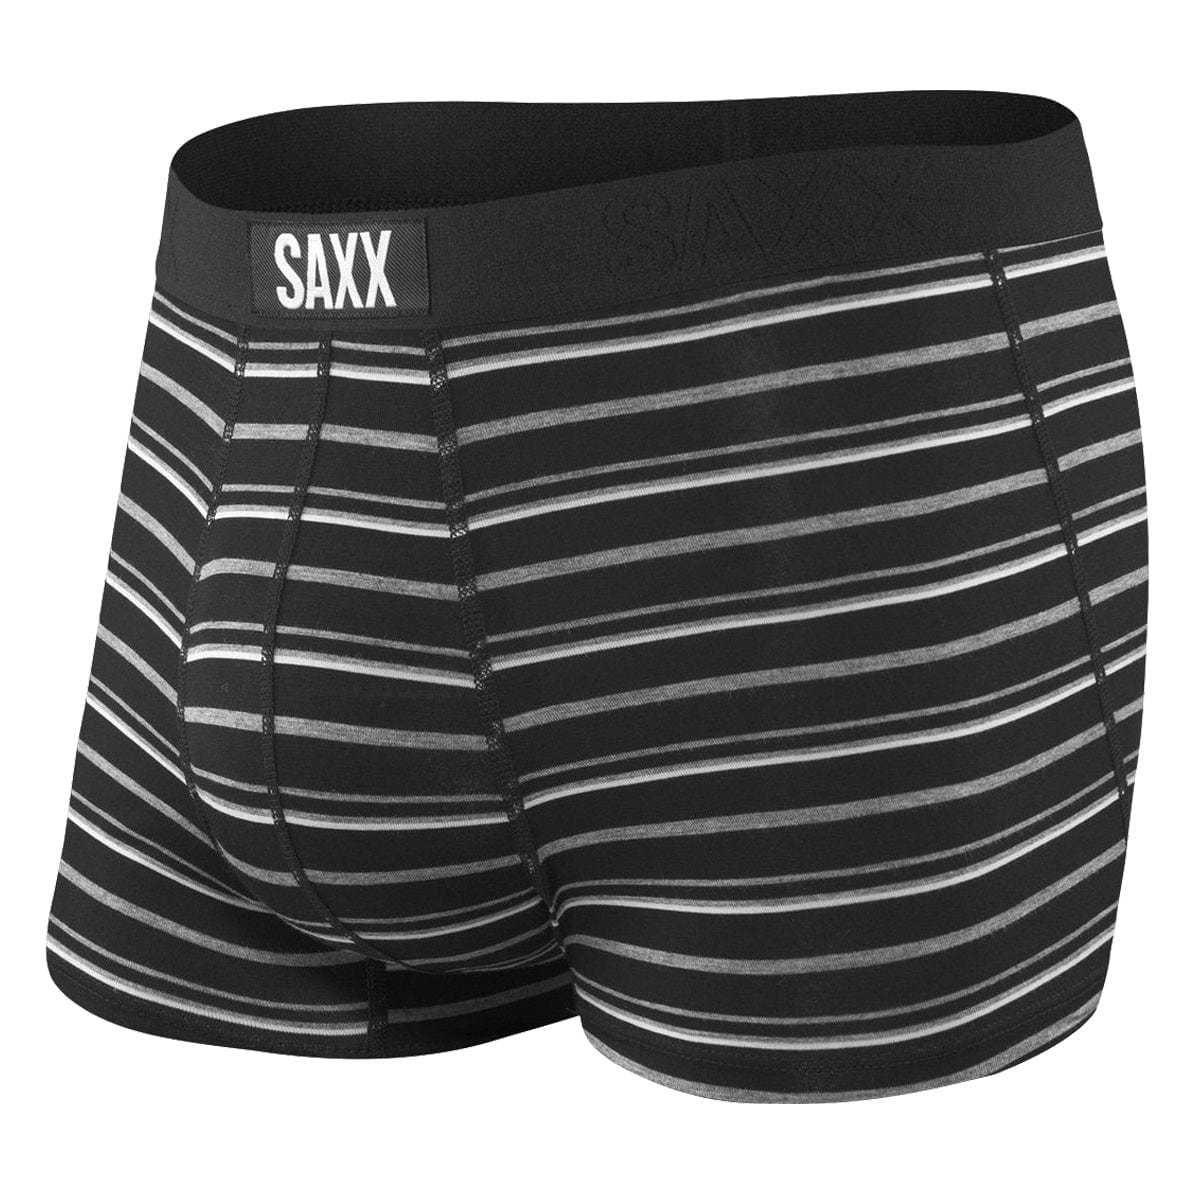 Saxx Vibe Boxers (Trunk Fit) - Black Coast Stripe - The Hockey Shop Source For Sports